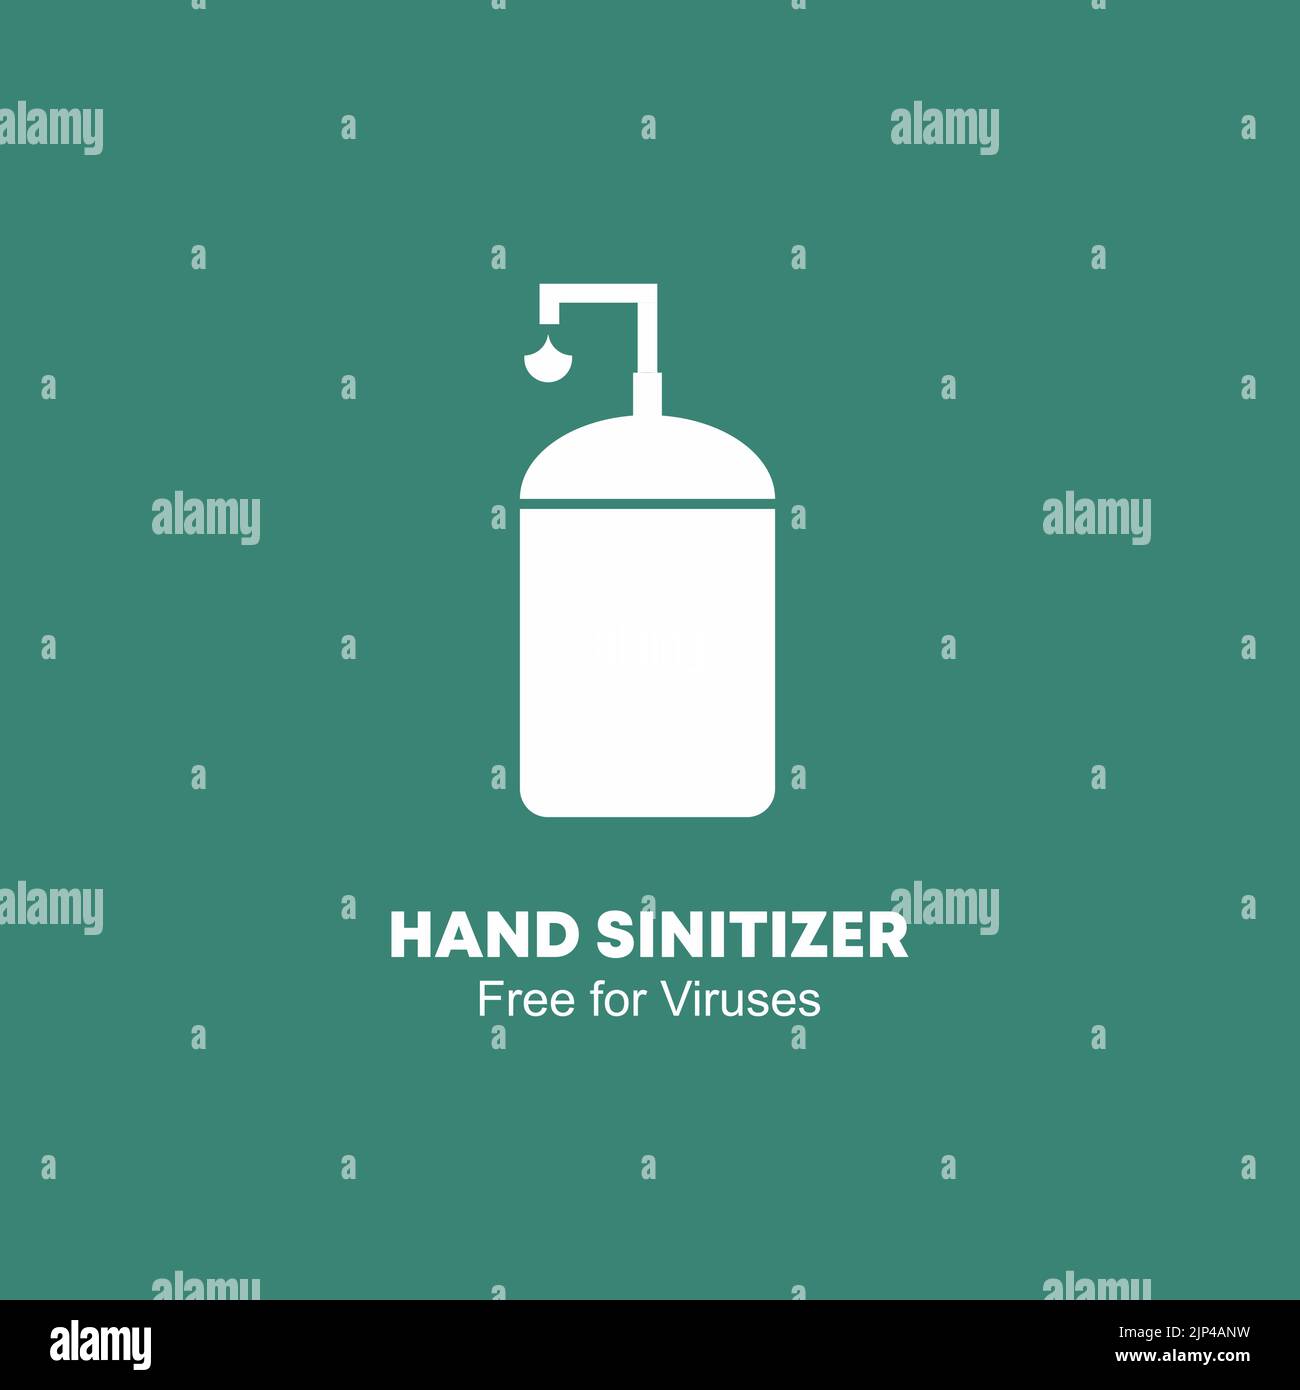 A hand sanitizer icon isolated on an emerald green background Stock Vector